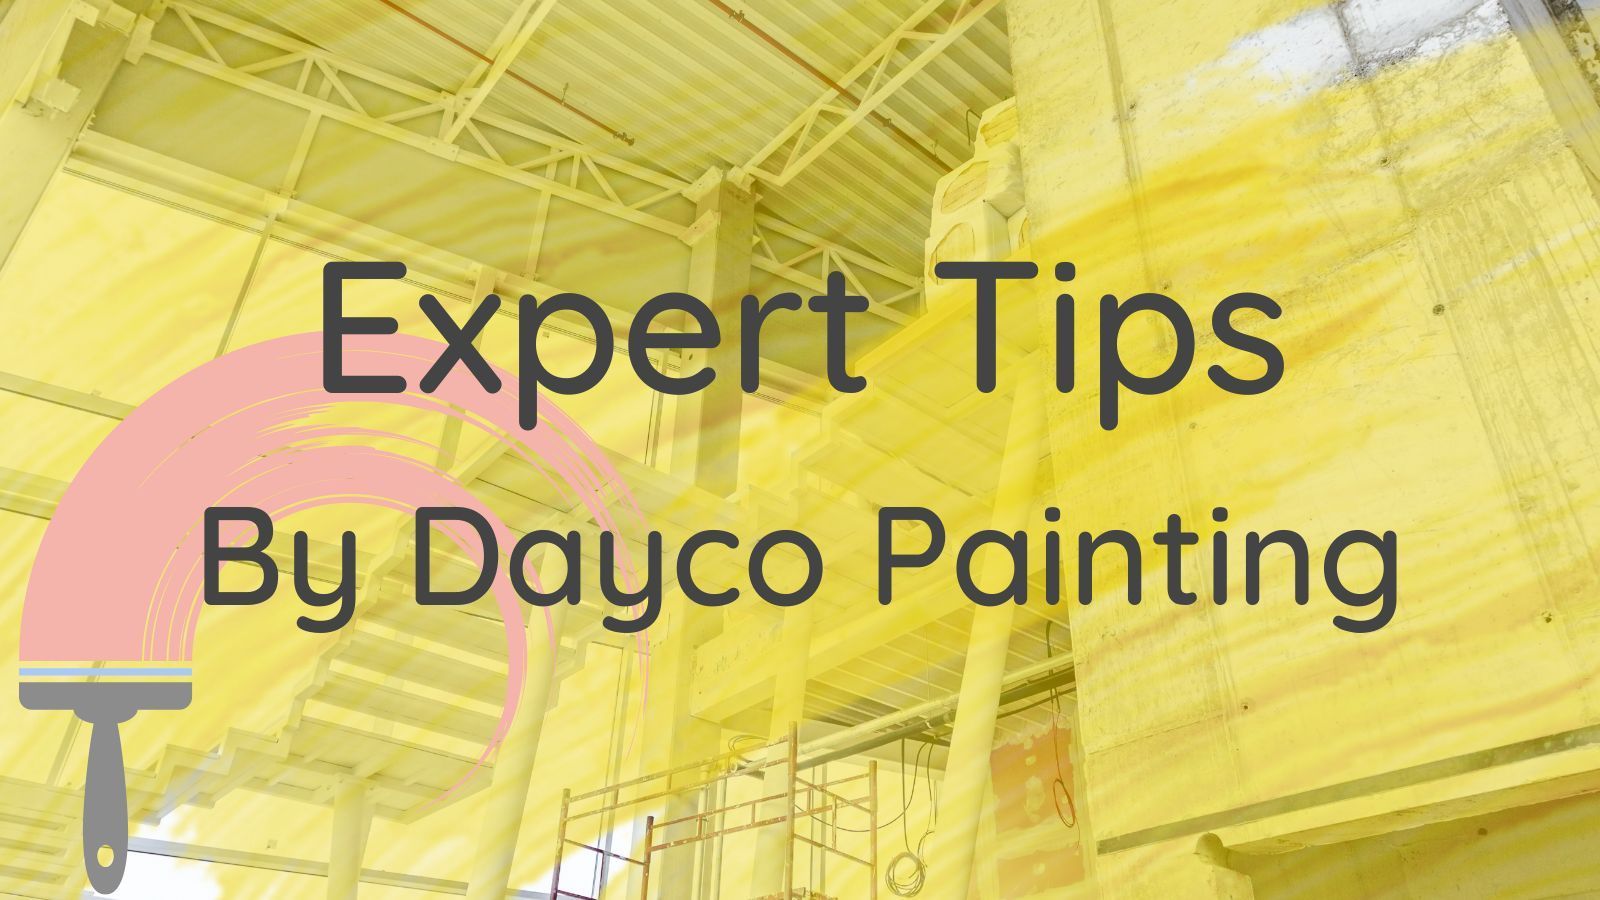 Metal Building with 'Expert Tips by Dayco Painting' text